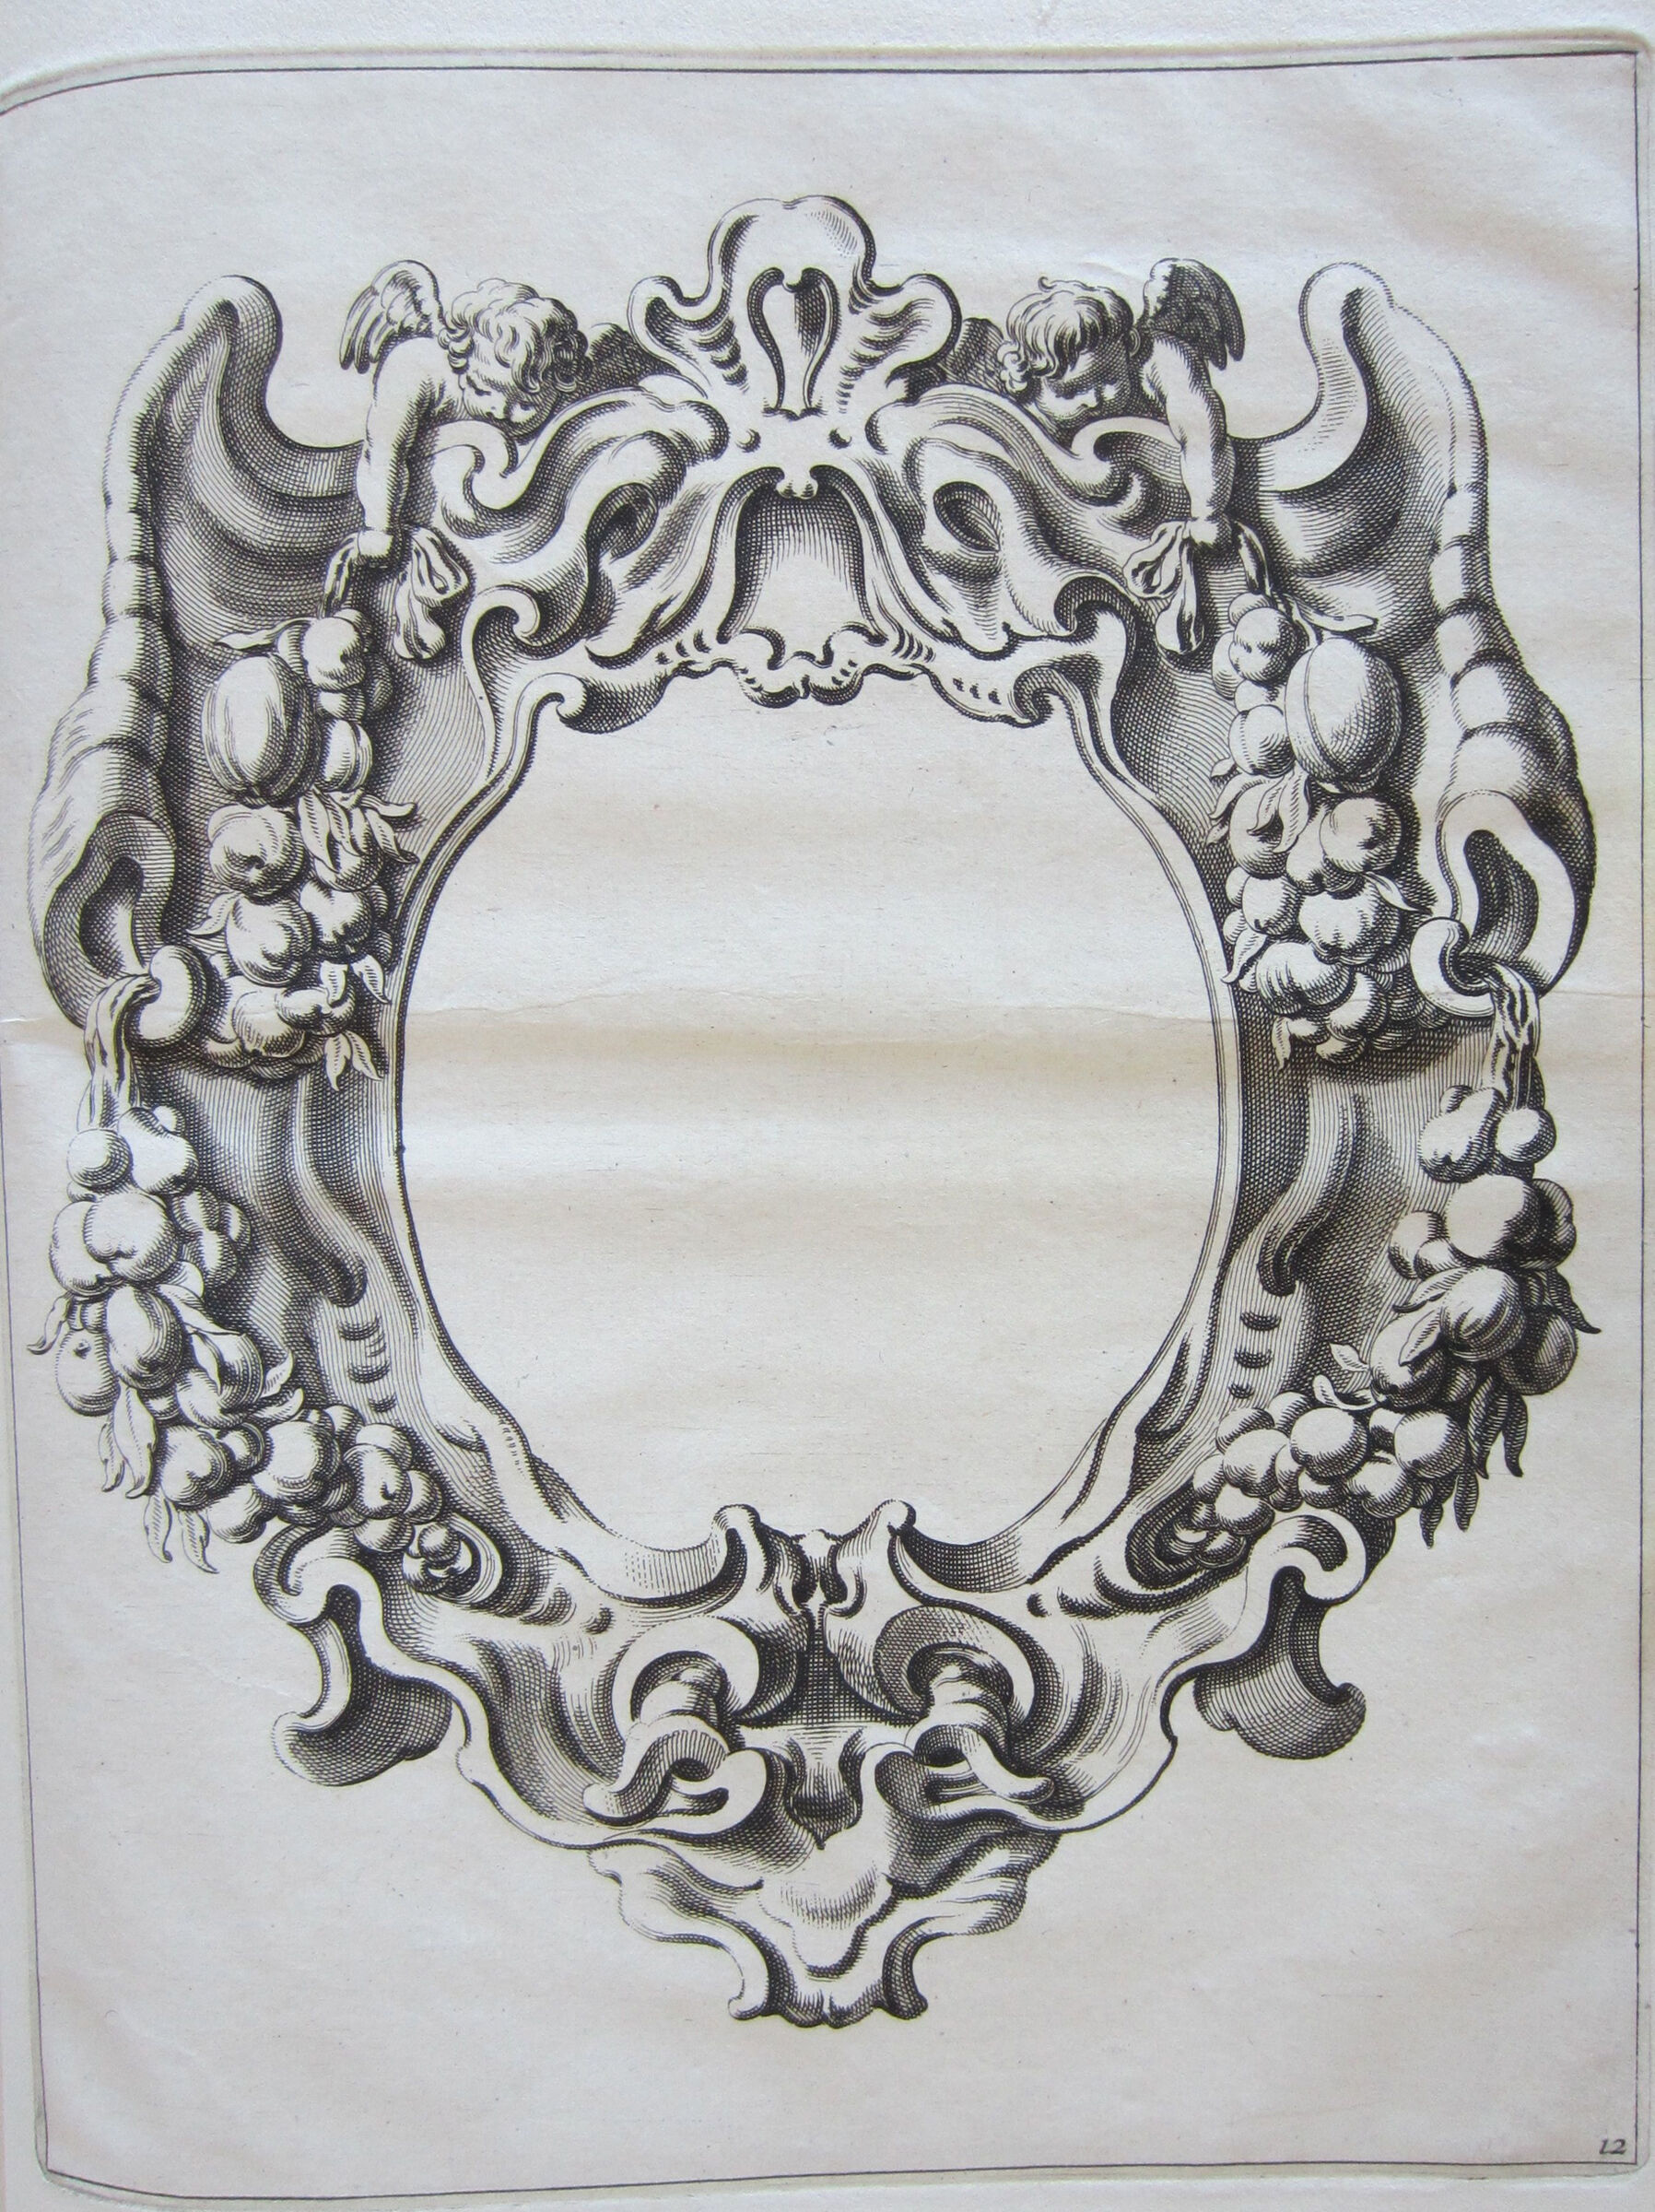 Auricular Cartouche With Two Winged Putti Holding Fruit Garlands With Ribbons